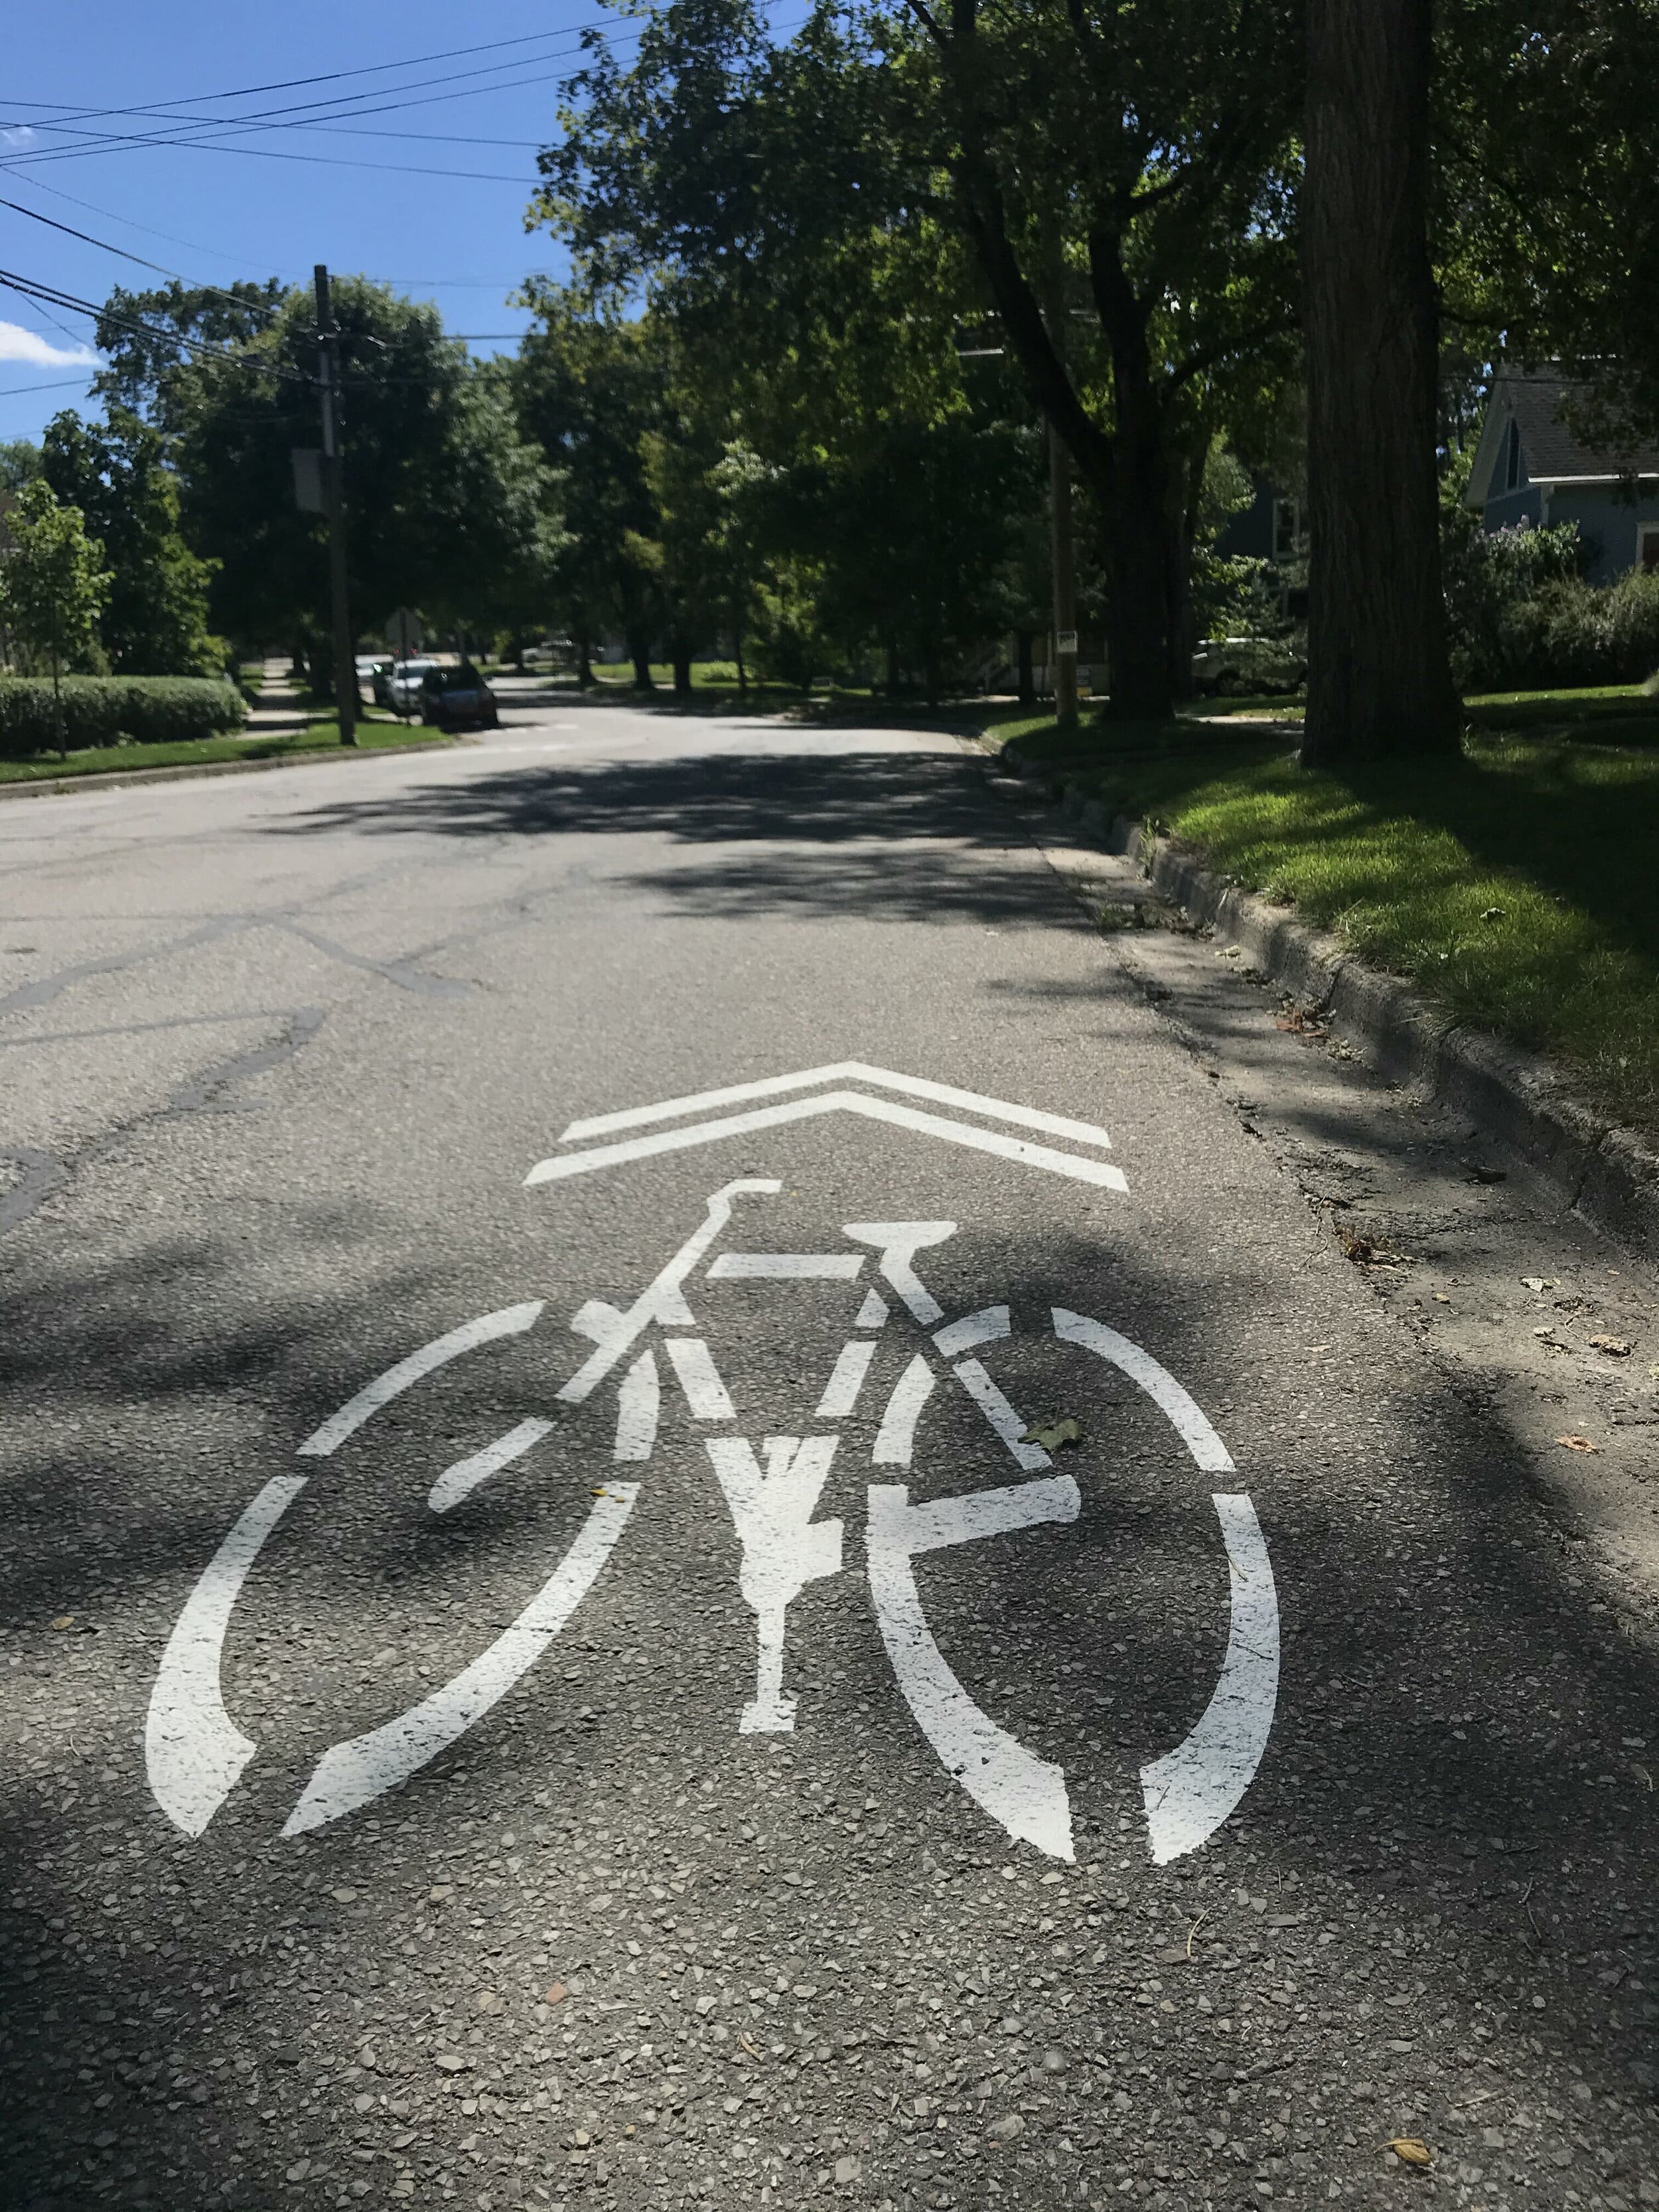  Shared lane markings, or “sharrows” have been added to McKinley Street, Railroad Street, and portions of N Freer Road. 